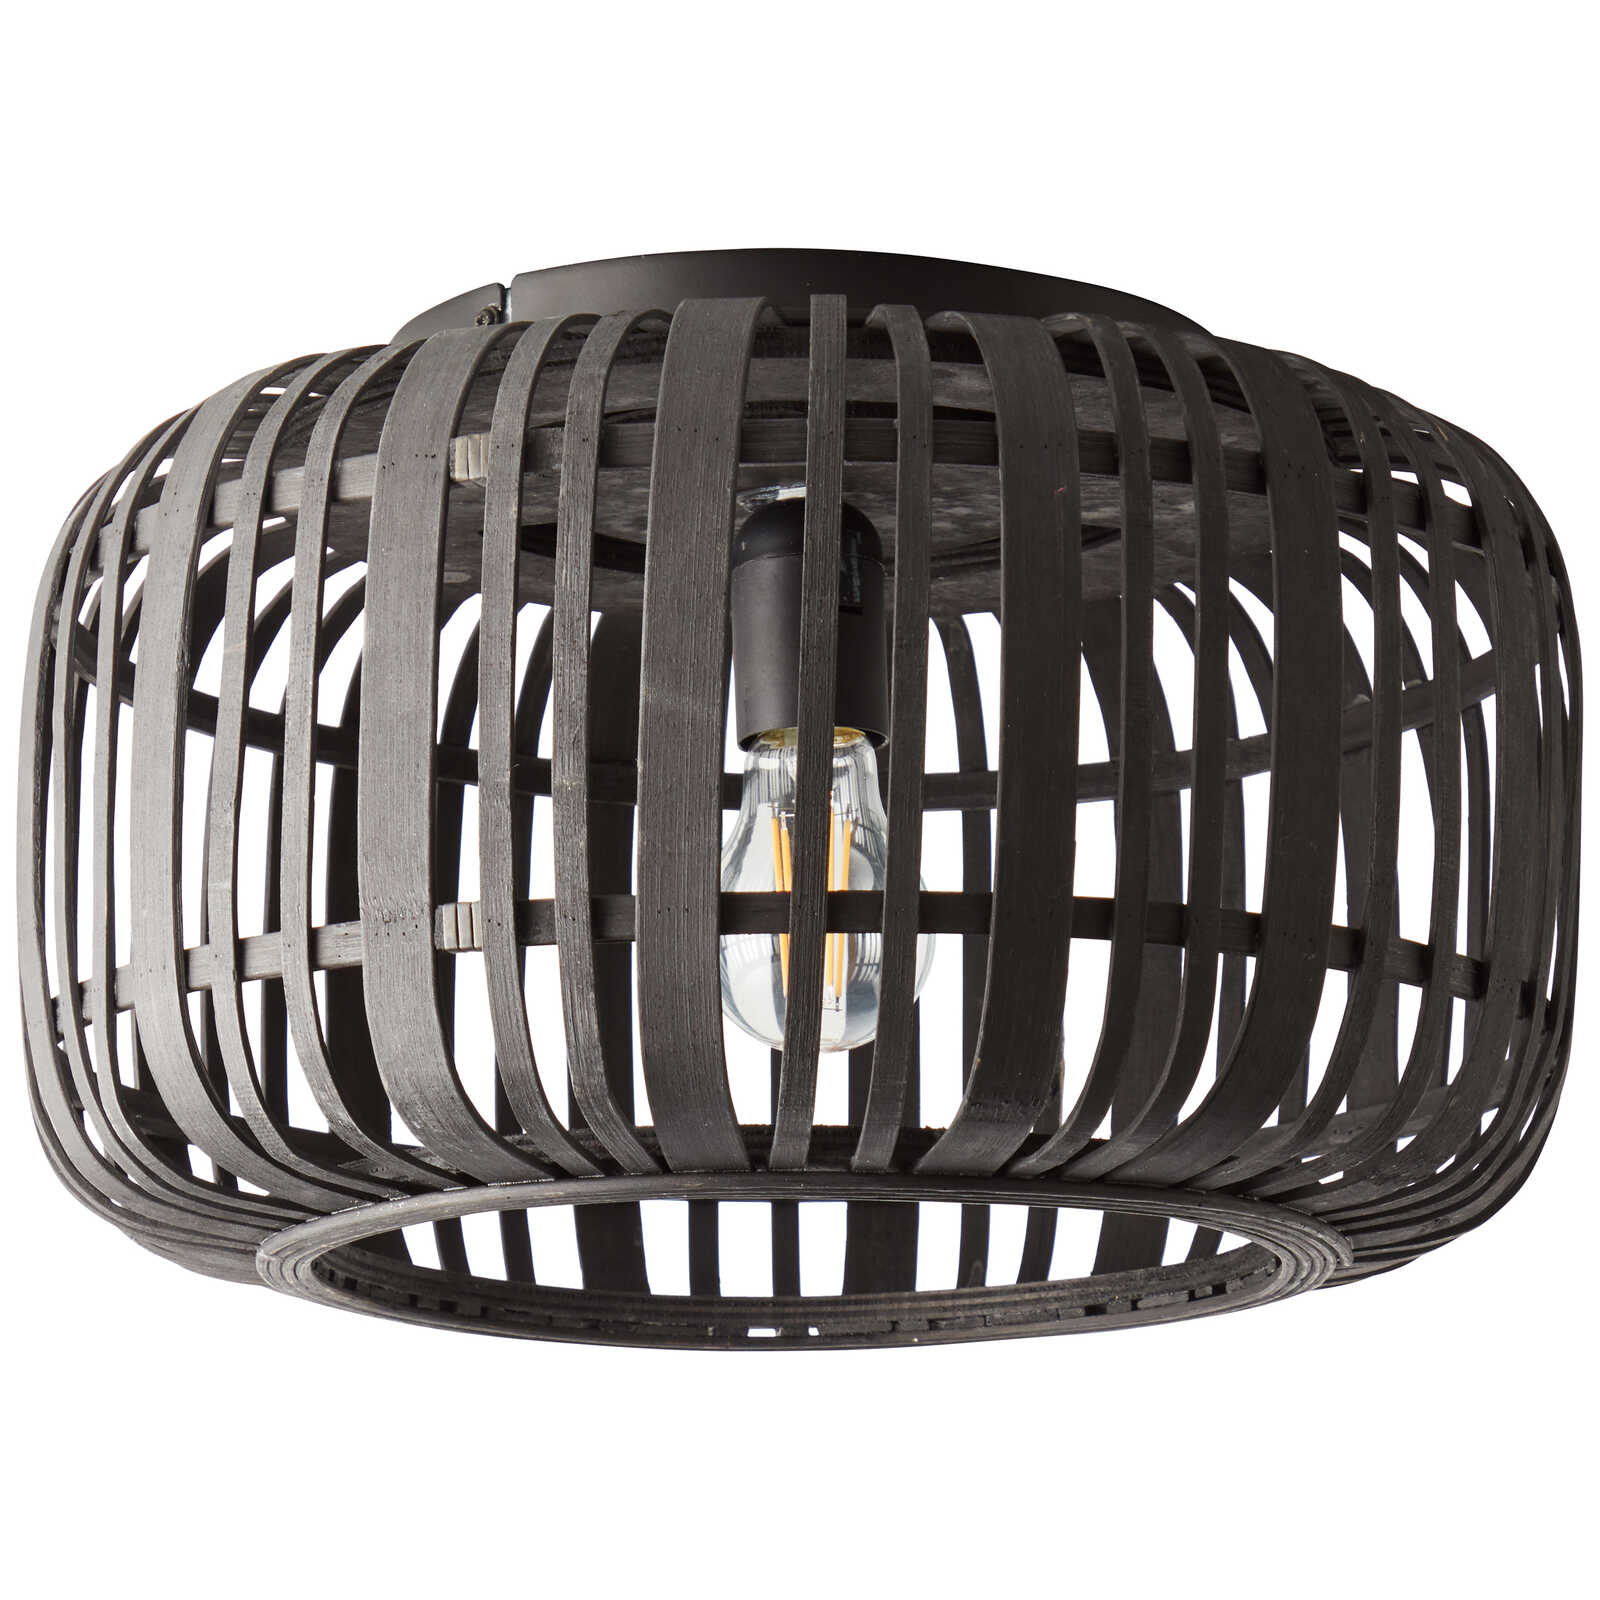             Bamboo ceiling light - Willi 7 - Brown
        